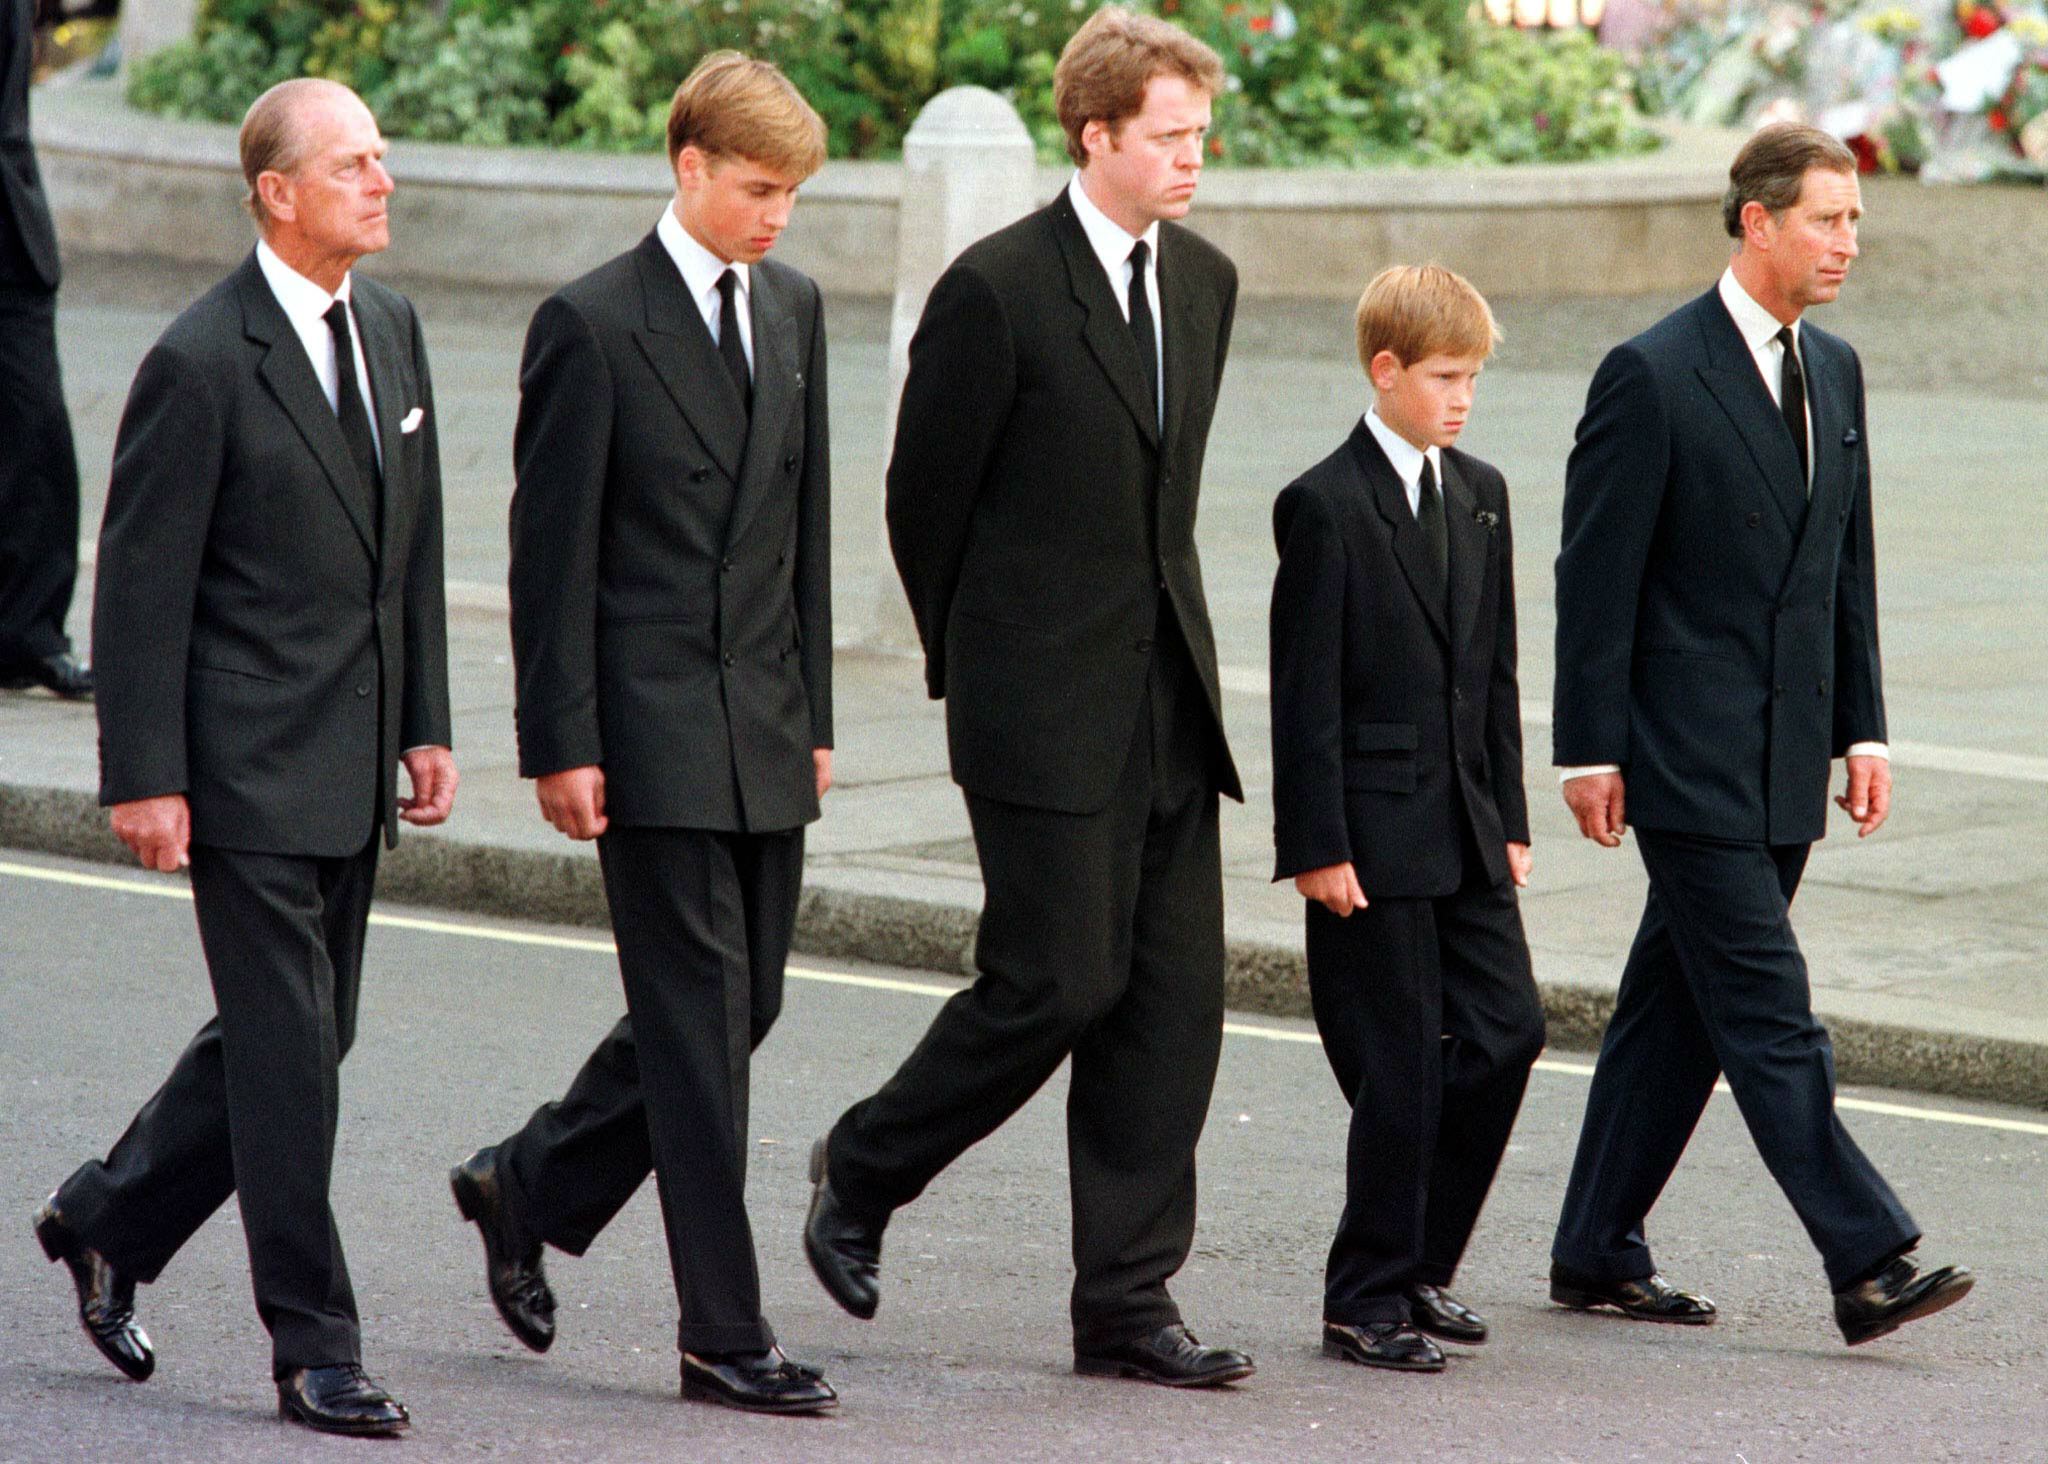 (L to R) The Duke of Edinburgh, Prince William, Earl Spencer, Prince Harry and Prince Charles walk outside Westminster Abbey during the funeral service for Diana, Princess of Wales.